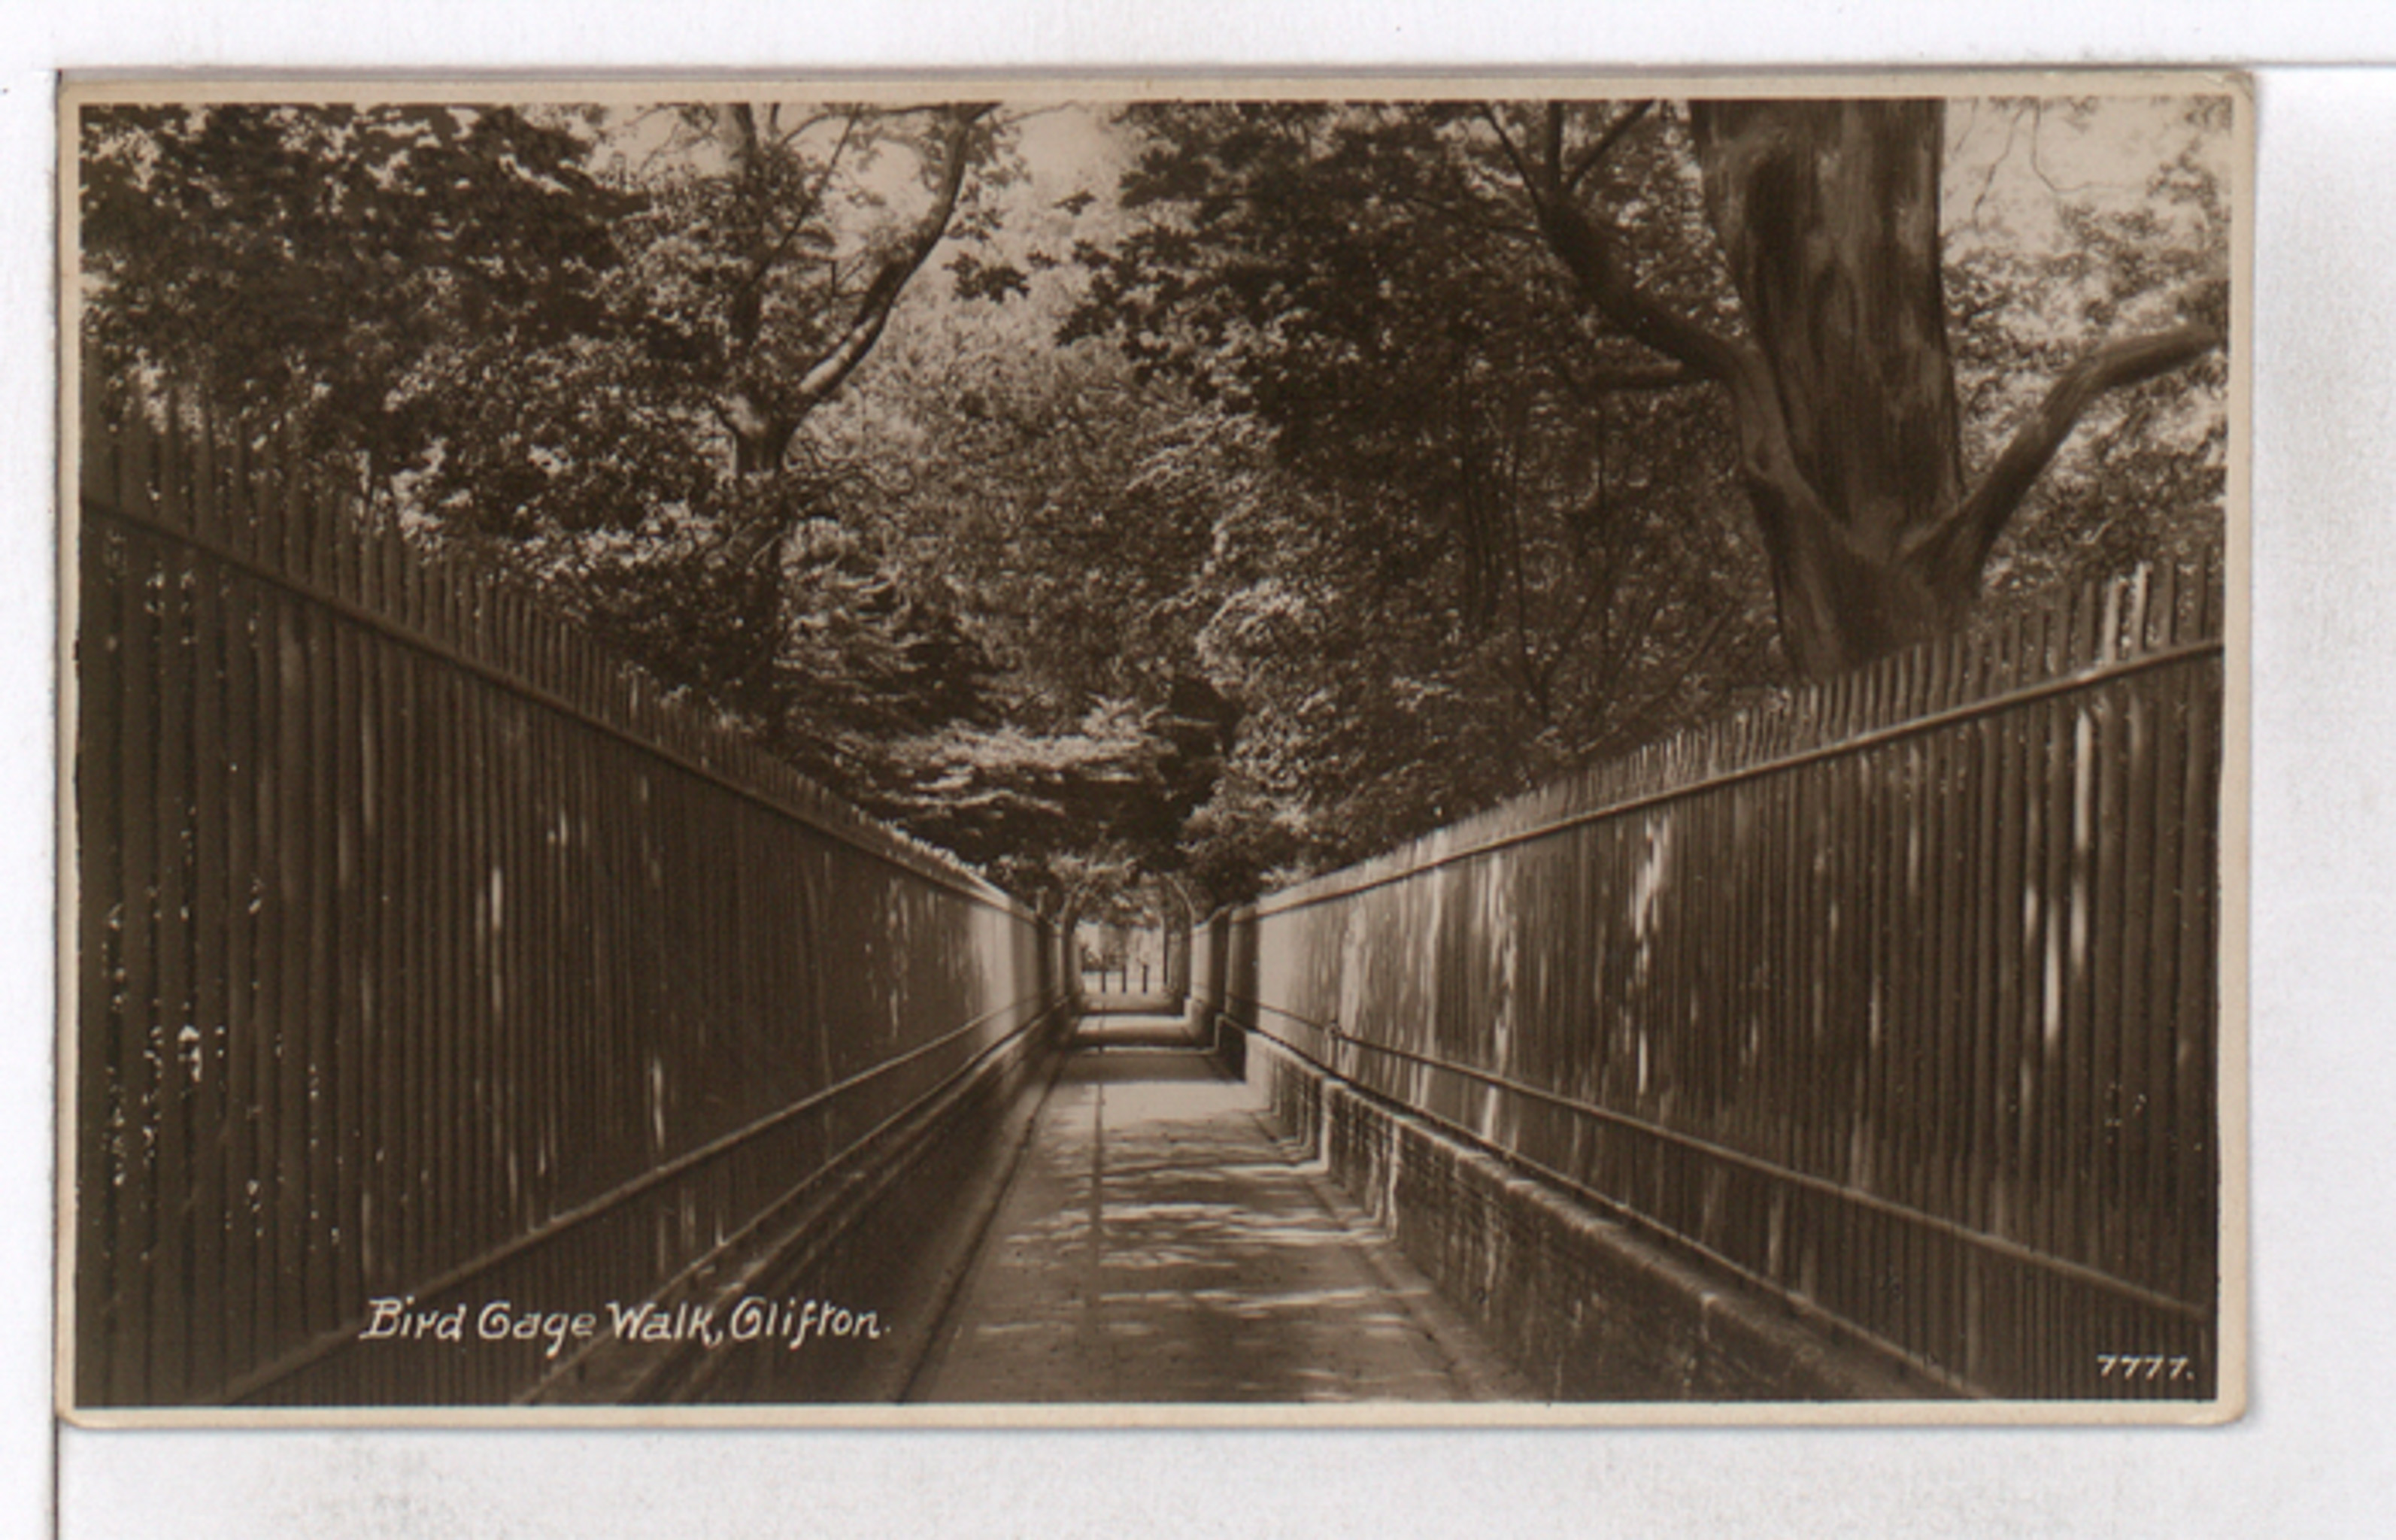 Birdcage Walk, Early Twentieth Century
Vaughan Collection, Bristol Archives, via Know Your Place.
